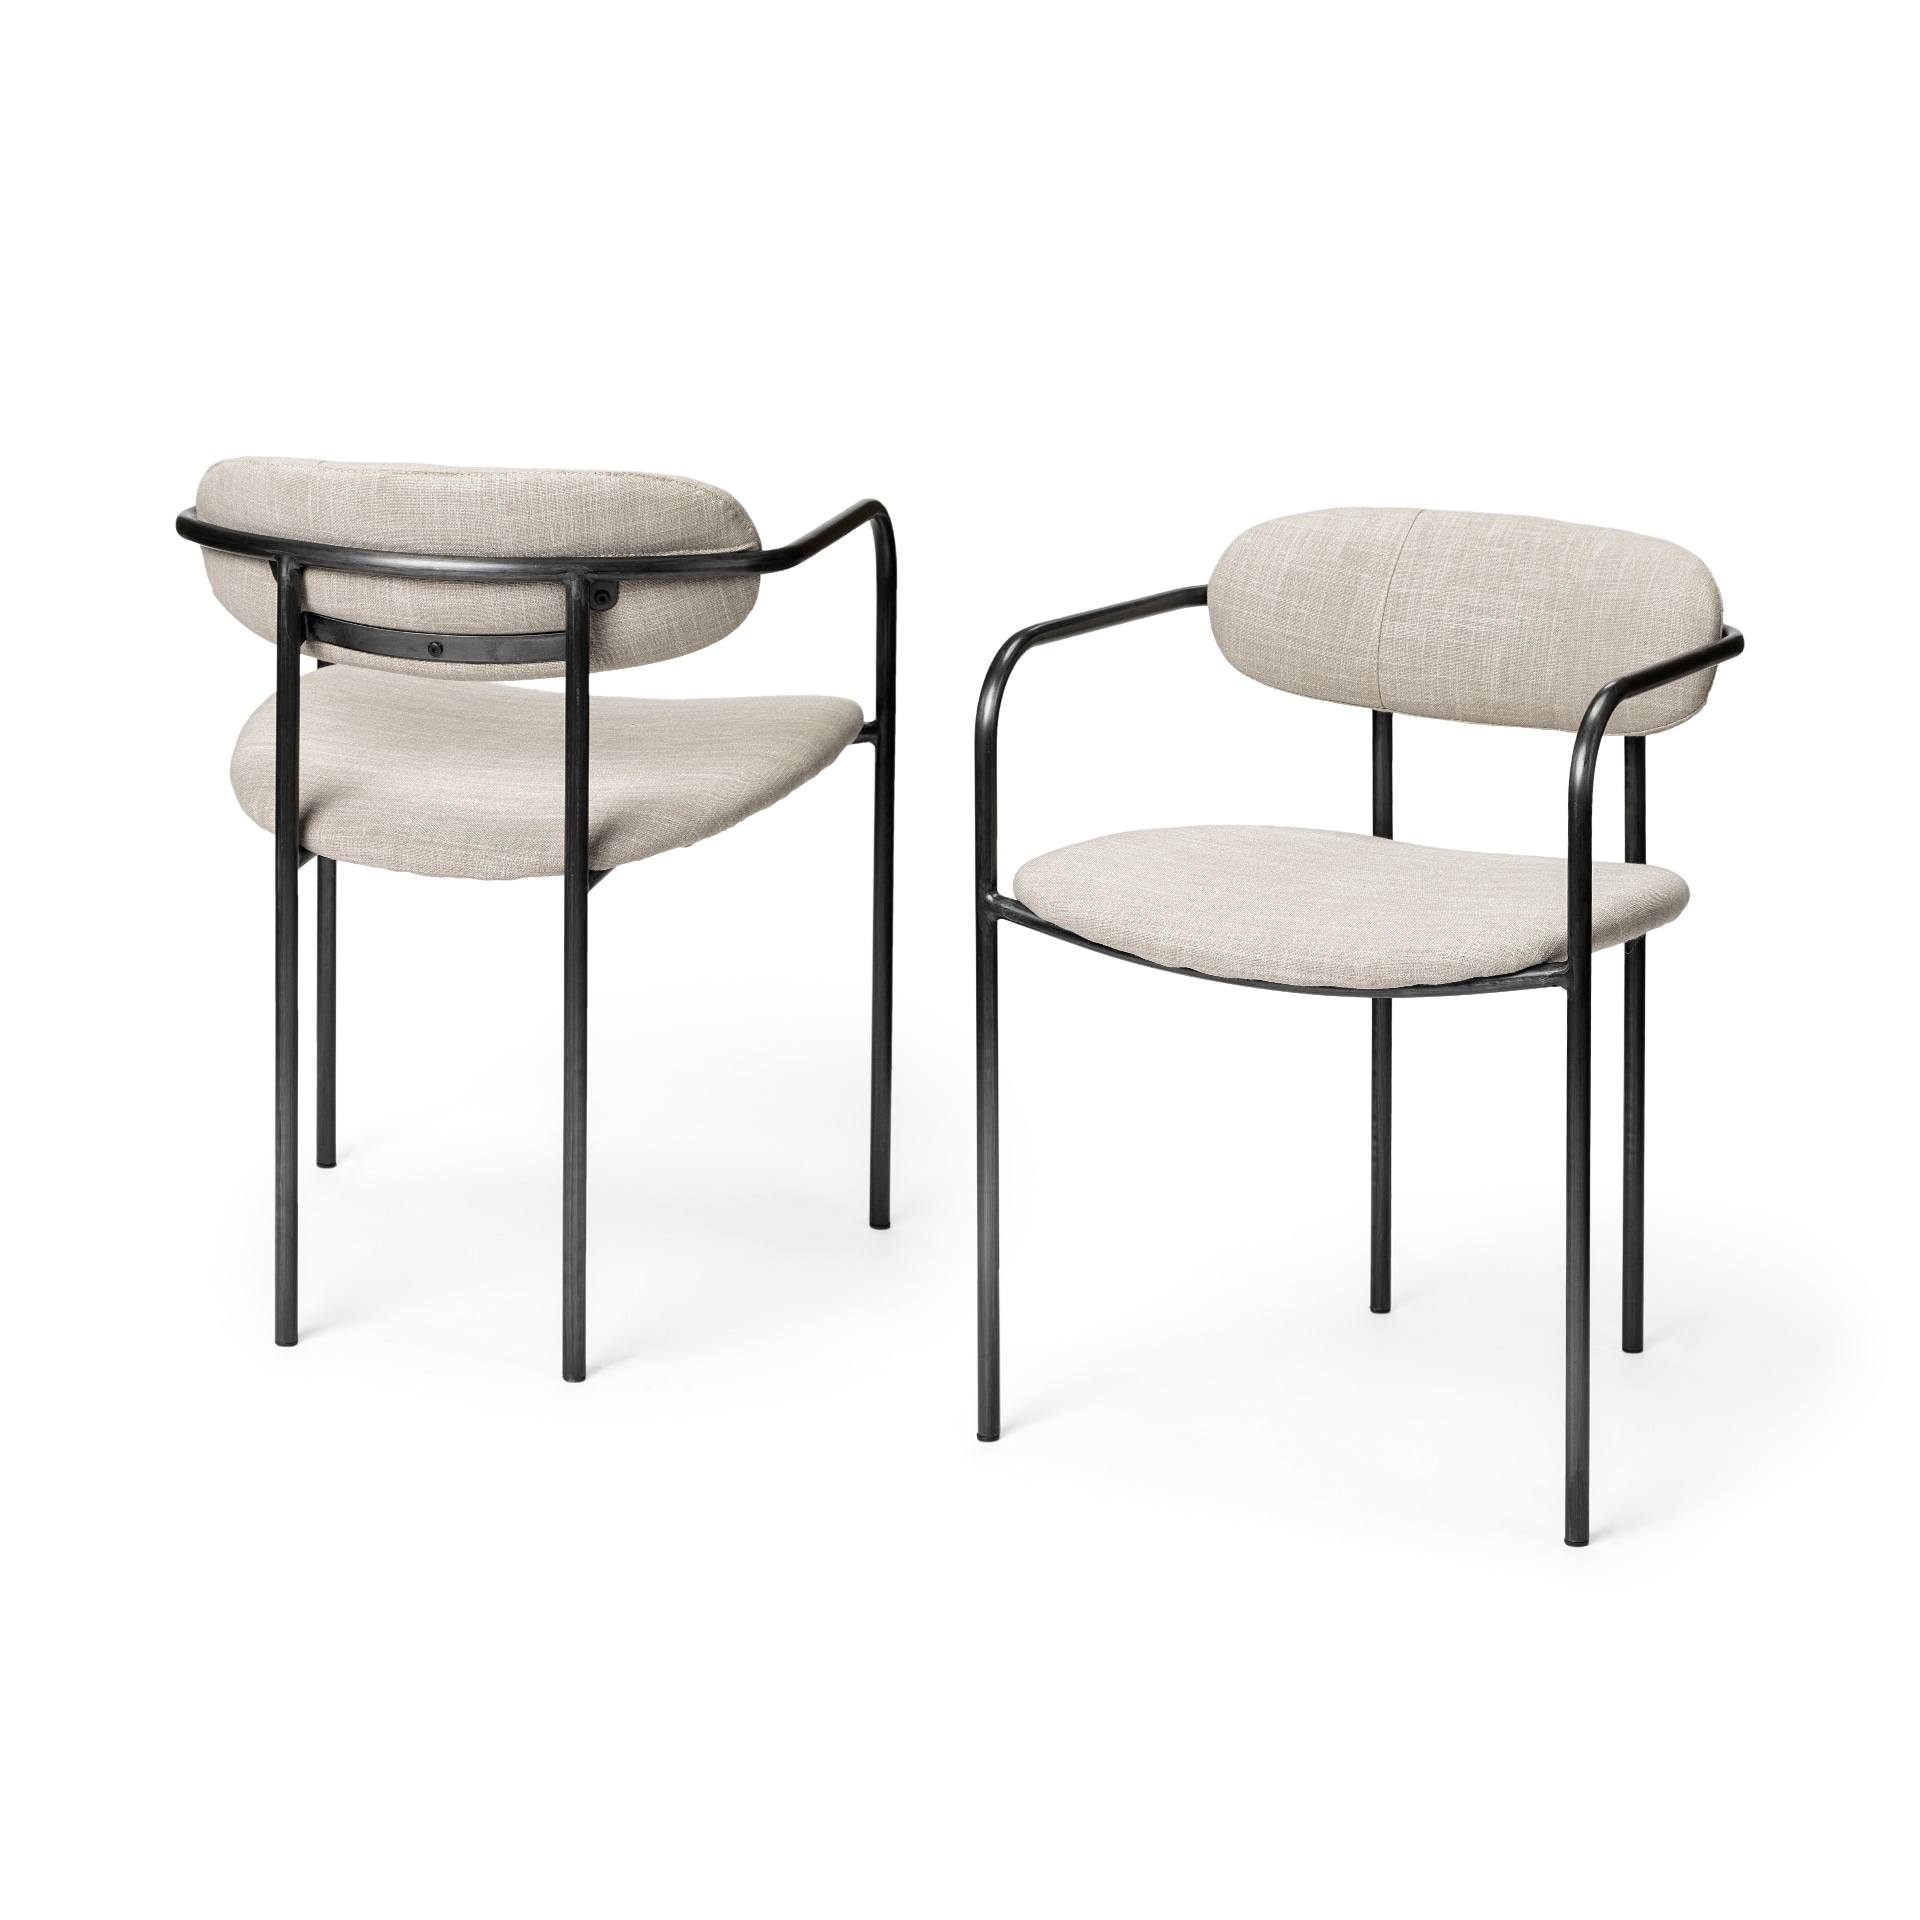 Parker Dining Chair - Set of 2 - 7907496